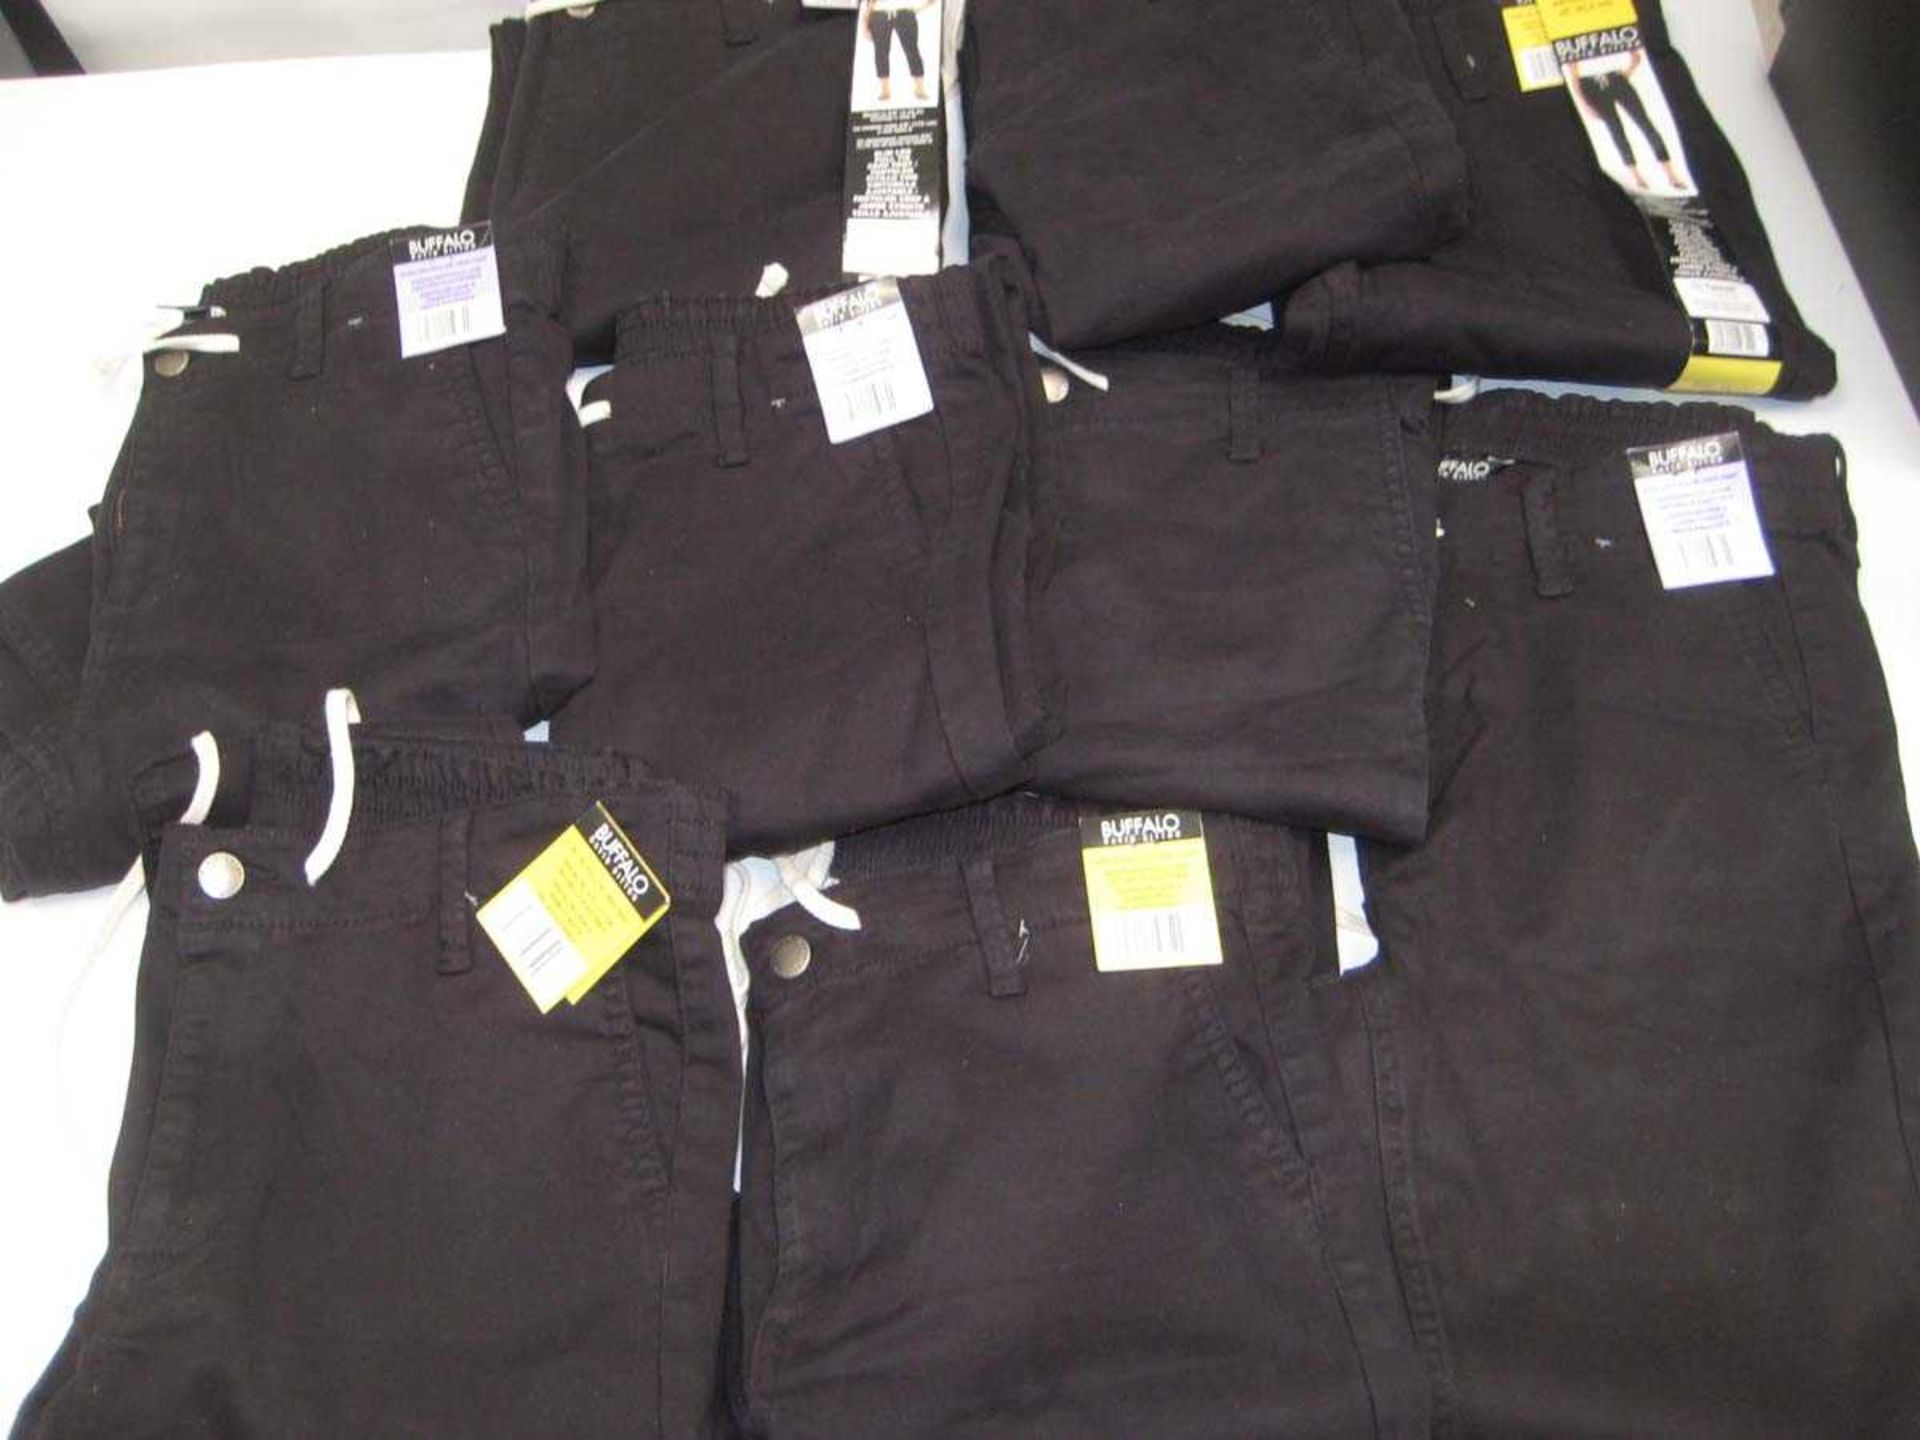 +VAT A bag containing 9x pairs of Ladies Black Crop Trousers in various sizes.